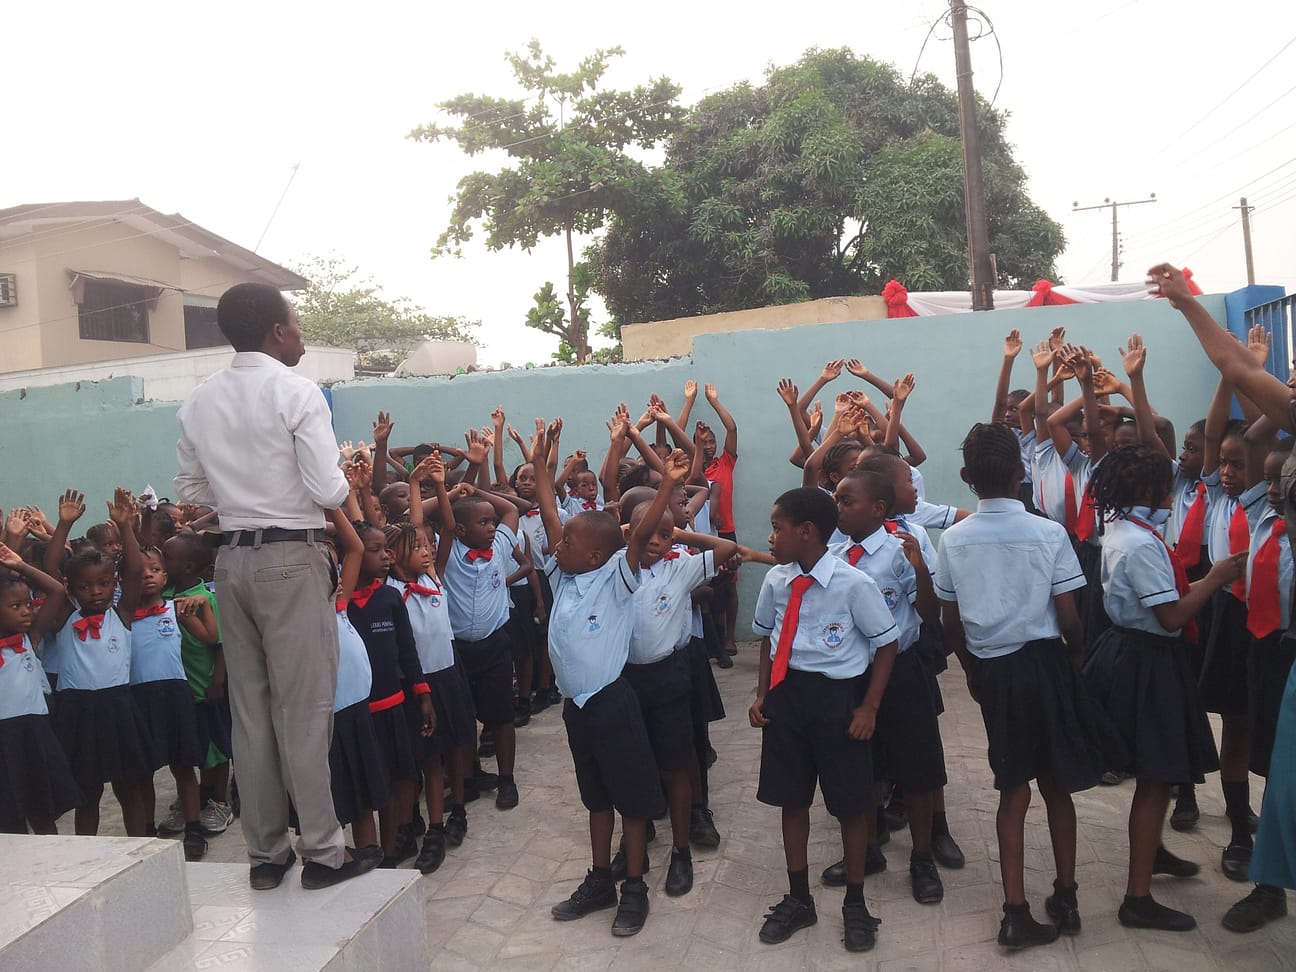 Students at the Lekki School lined up for an assembly.